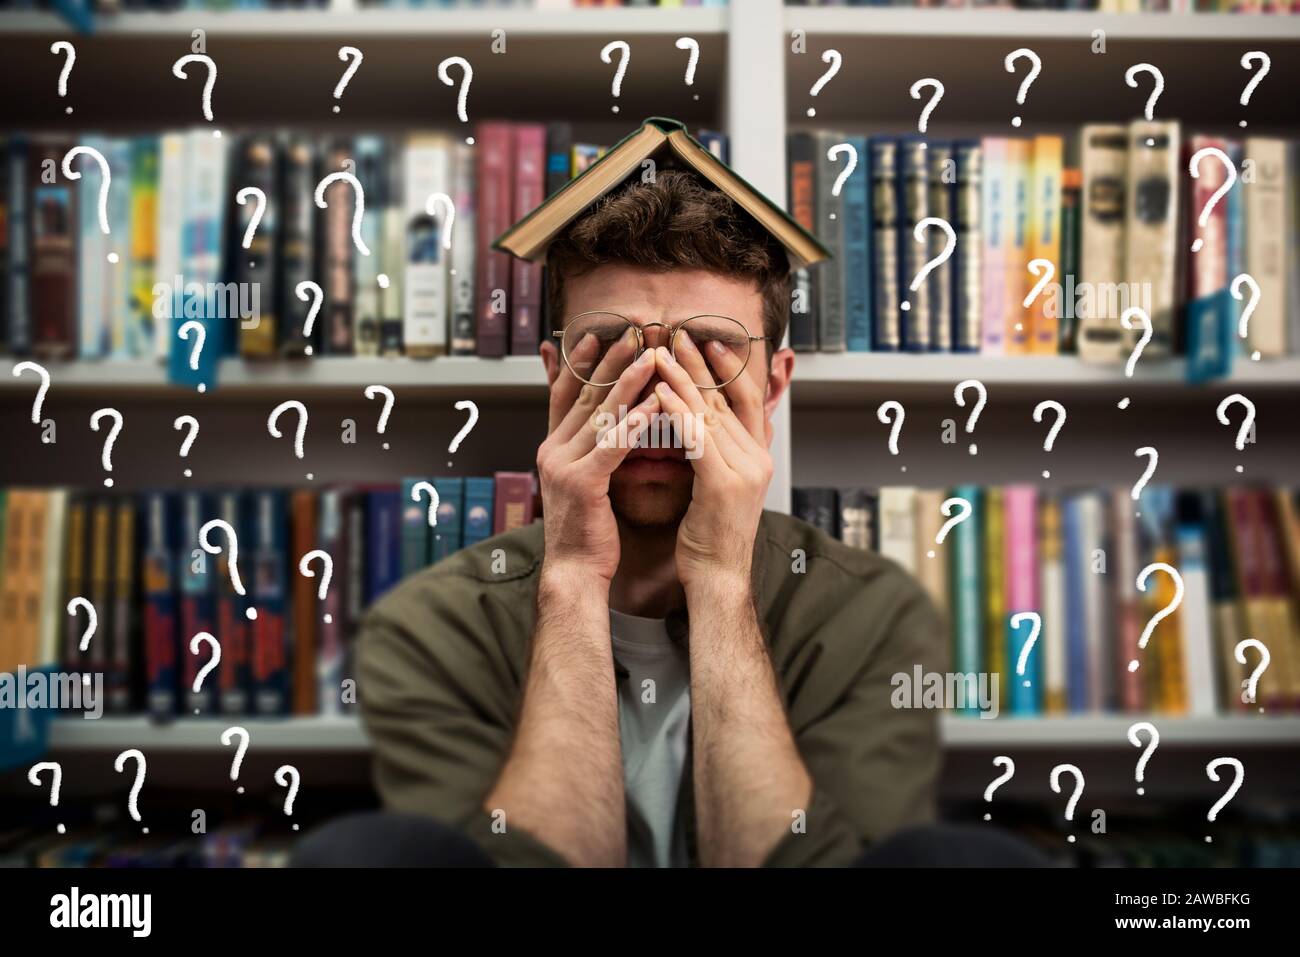 Tired university student has difficulty to study. Full of question mark. Concept of stress and difficulty Stock Photo